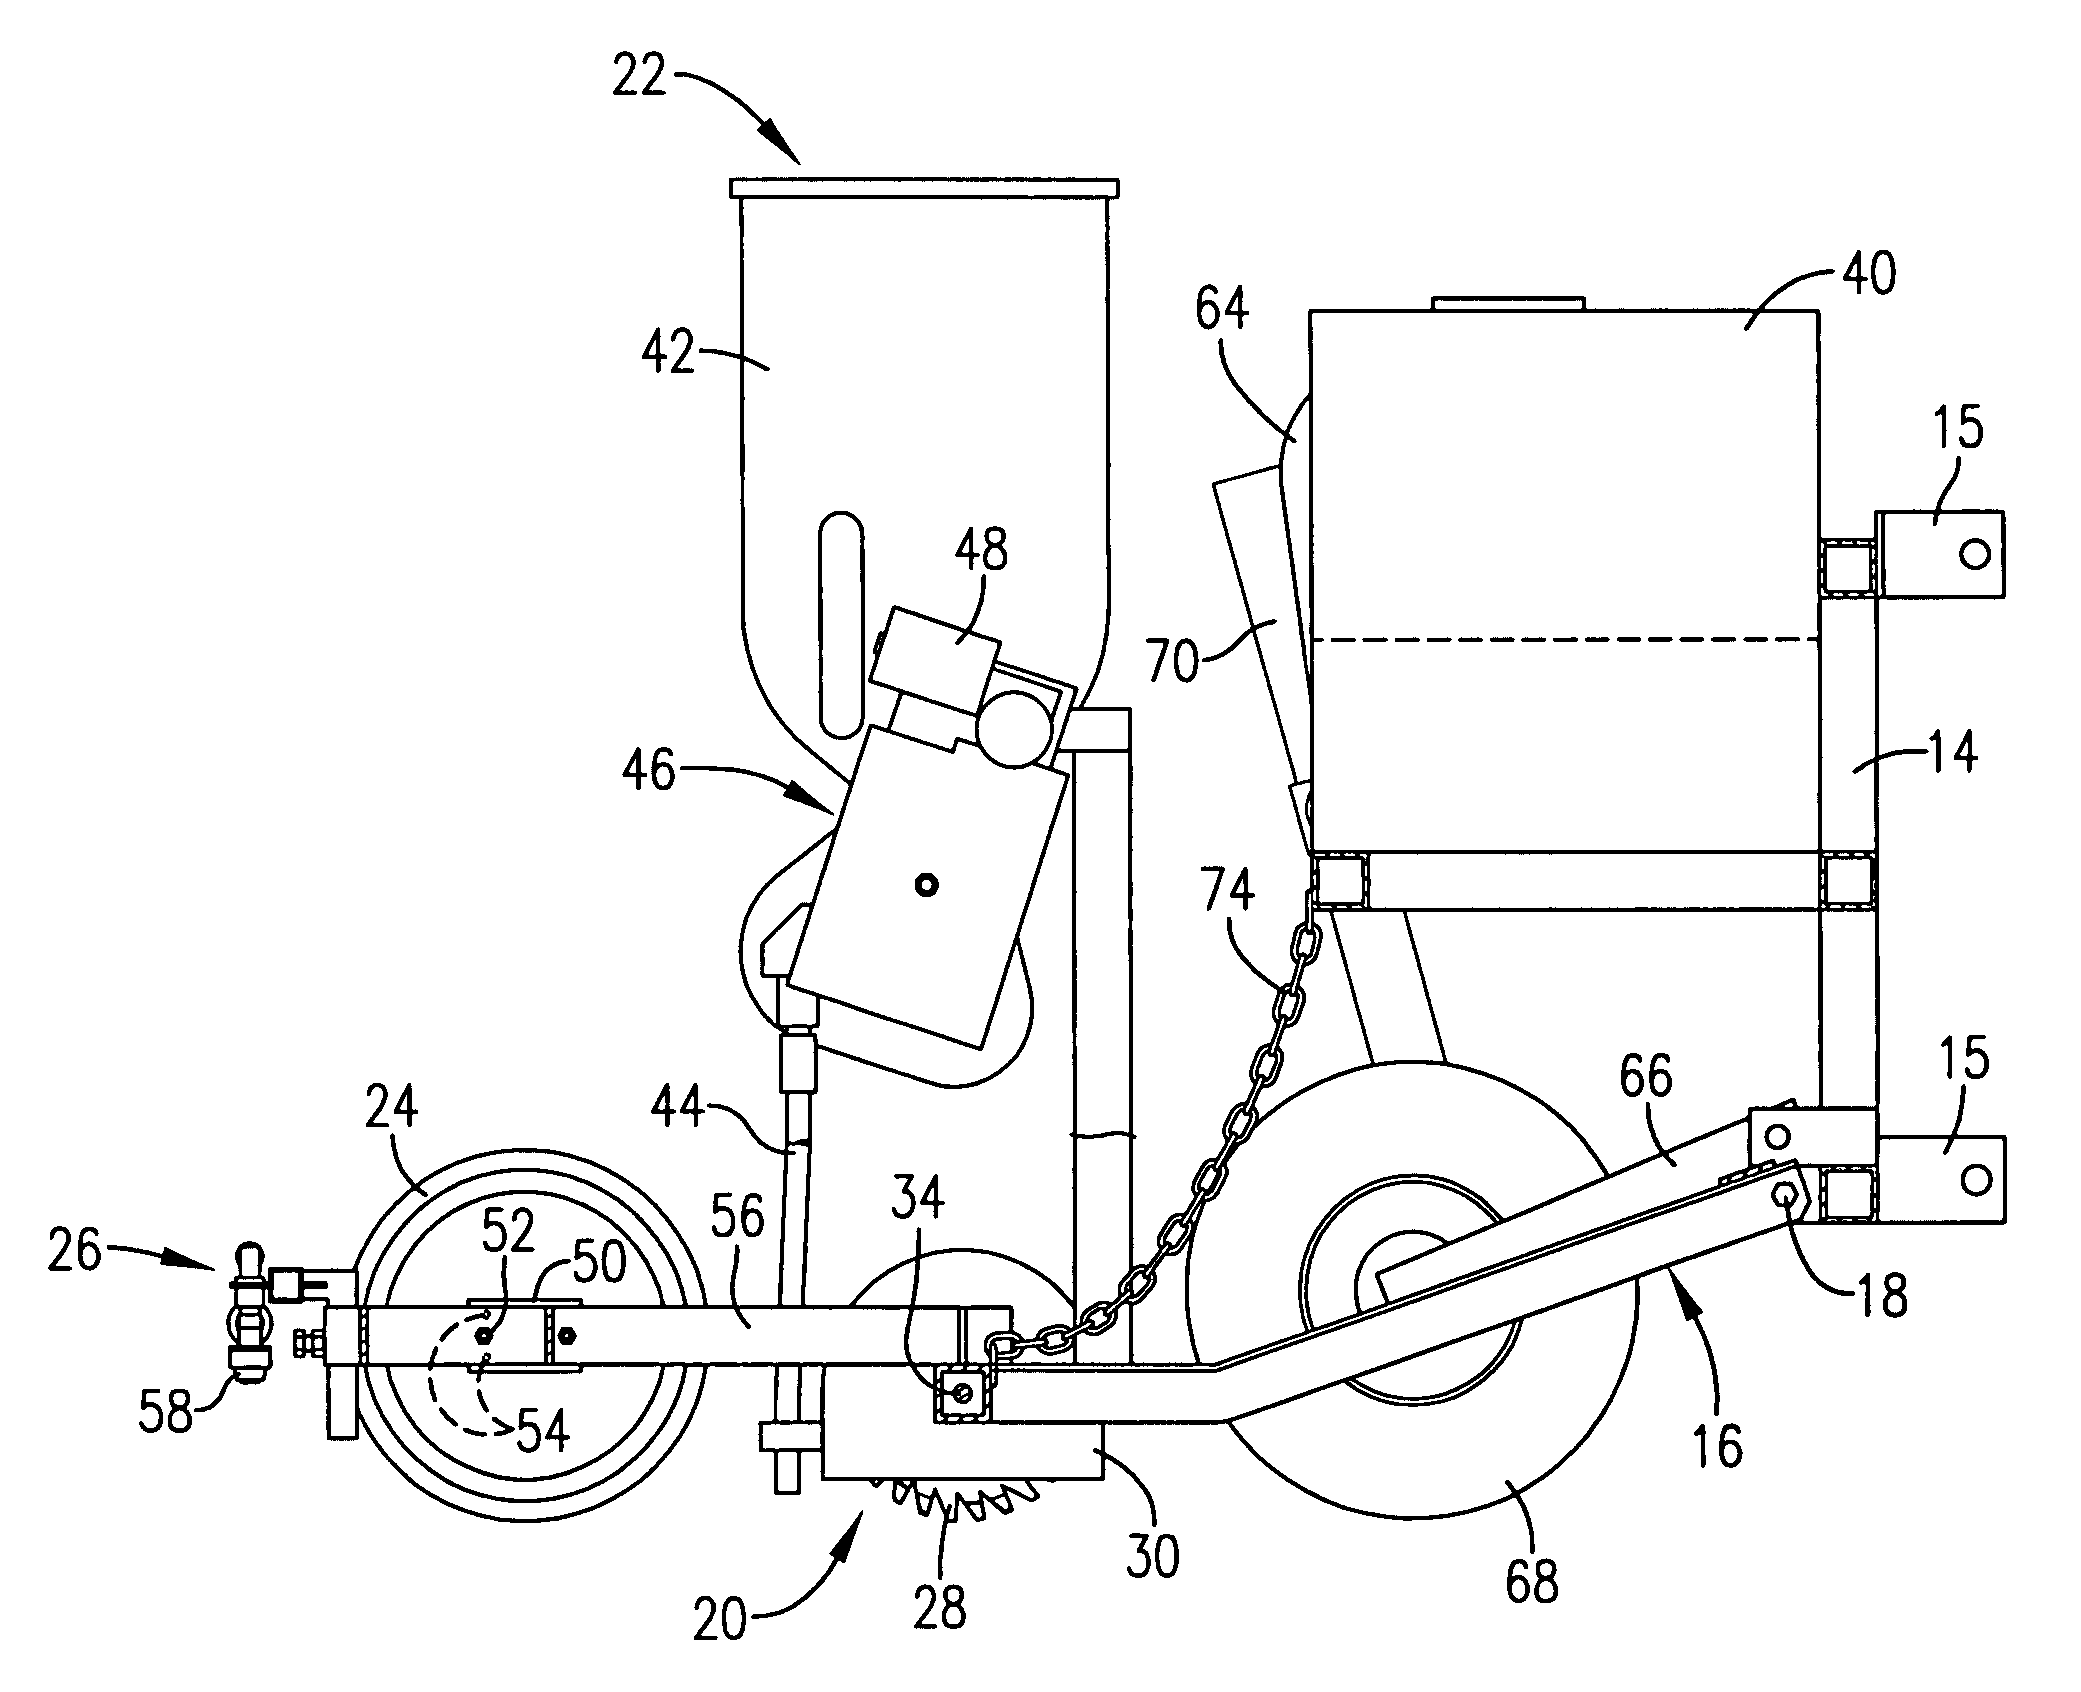 Method and equipment for interseeding an area of ground to convert the existing vegetation or to improve the quality of the existing vegetation